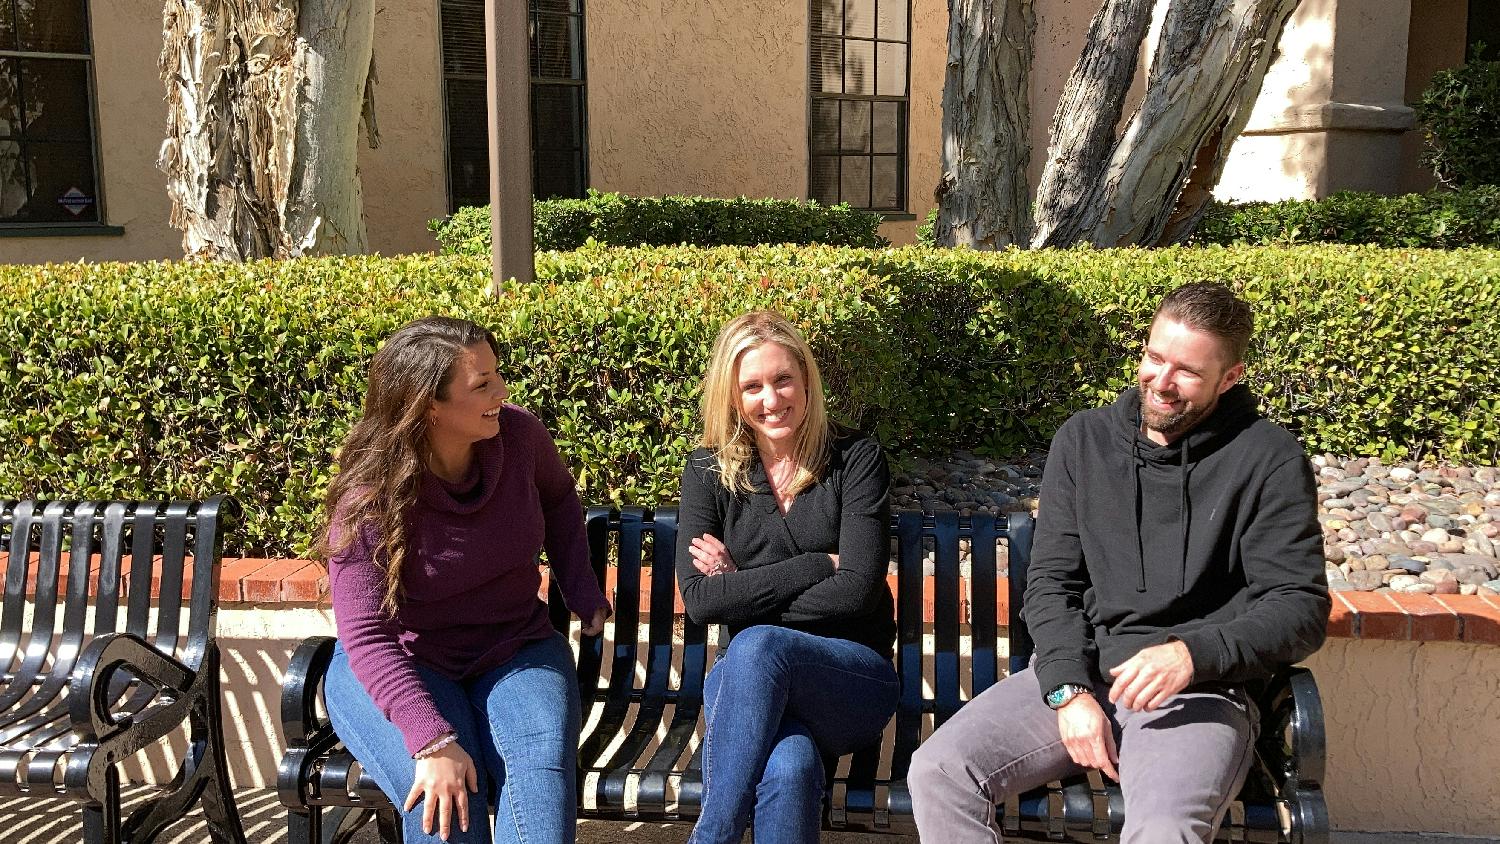 The team enjoying an impromptu social hour in the courtyard of our San Diego Headquarters.